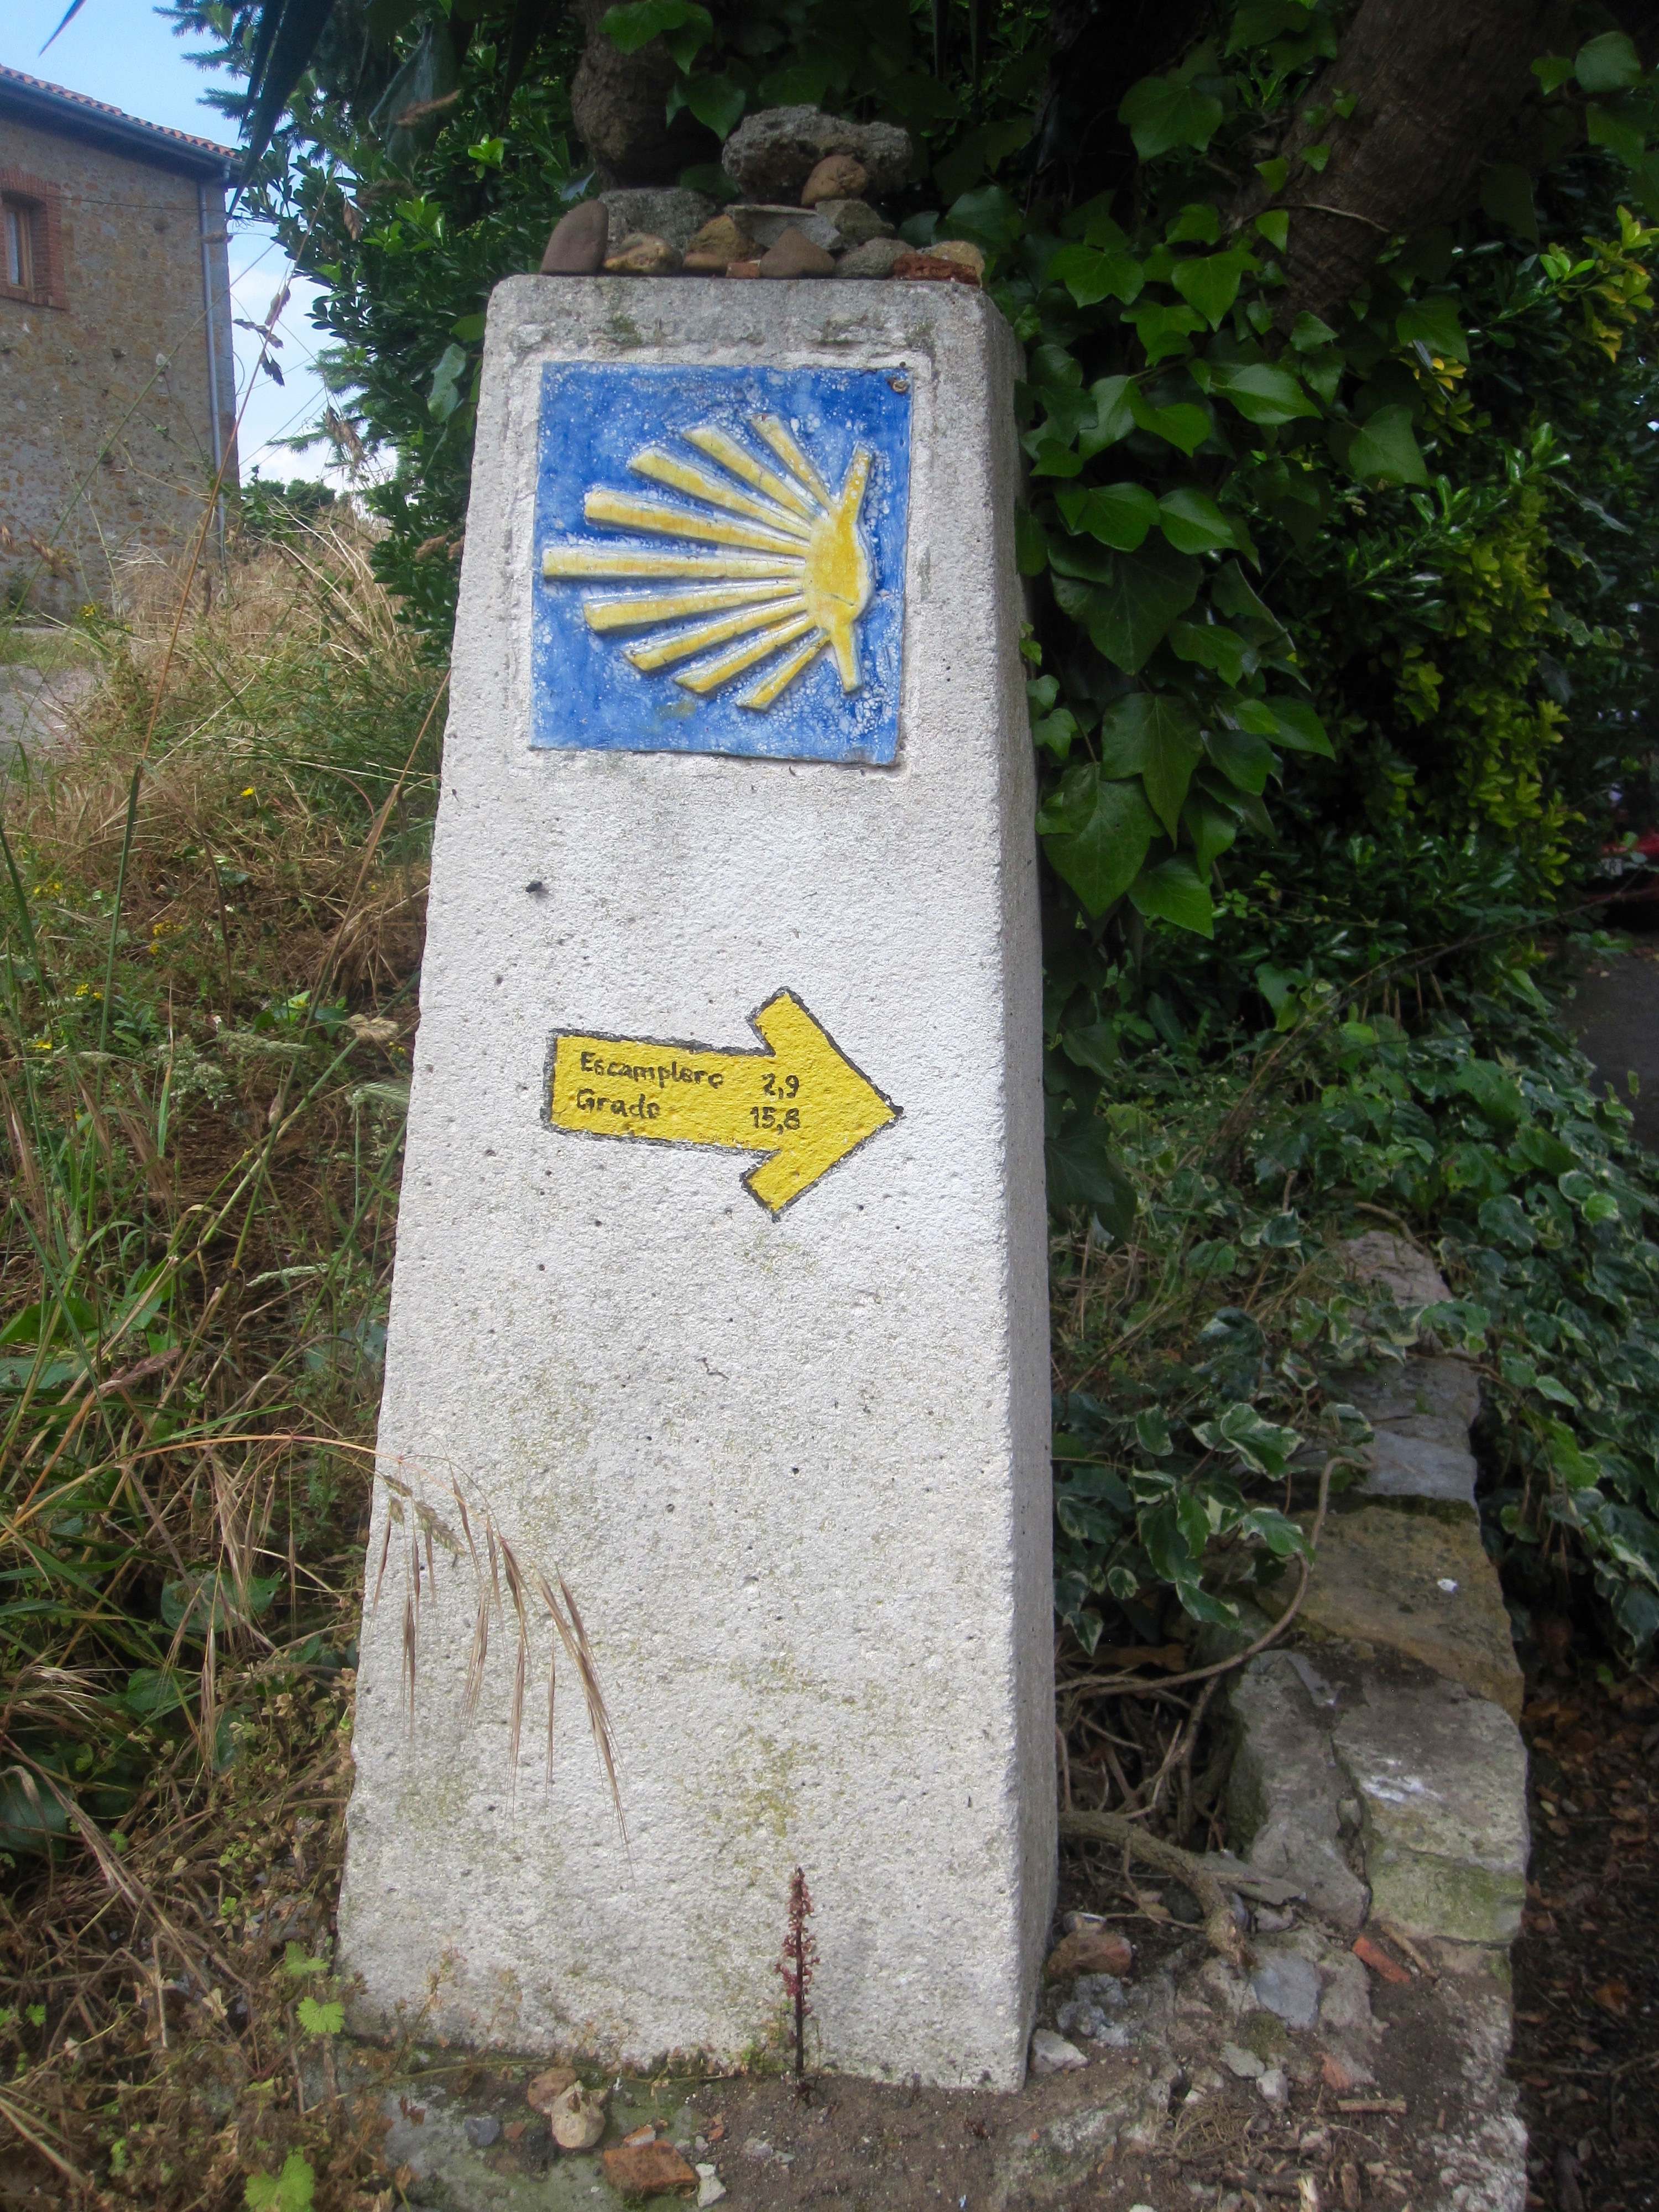 Typical marker of the way – tile with yellow shell on blue background